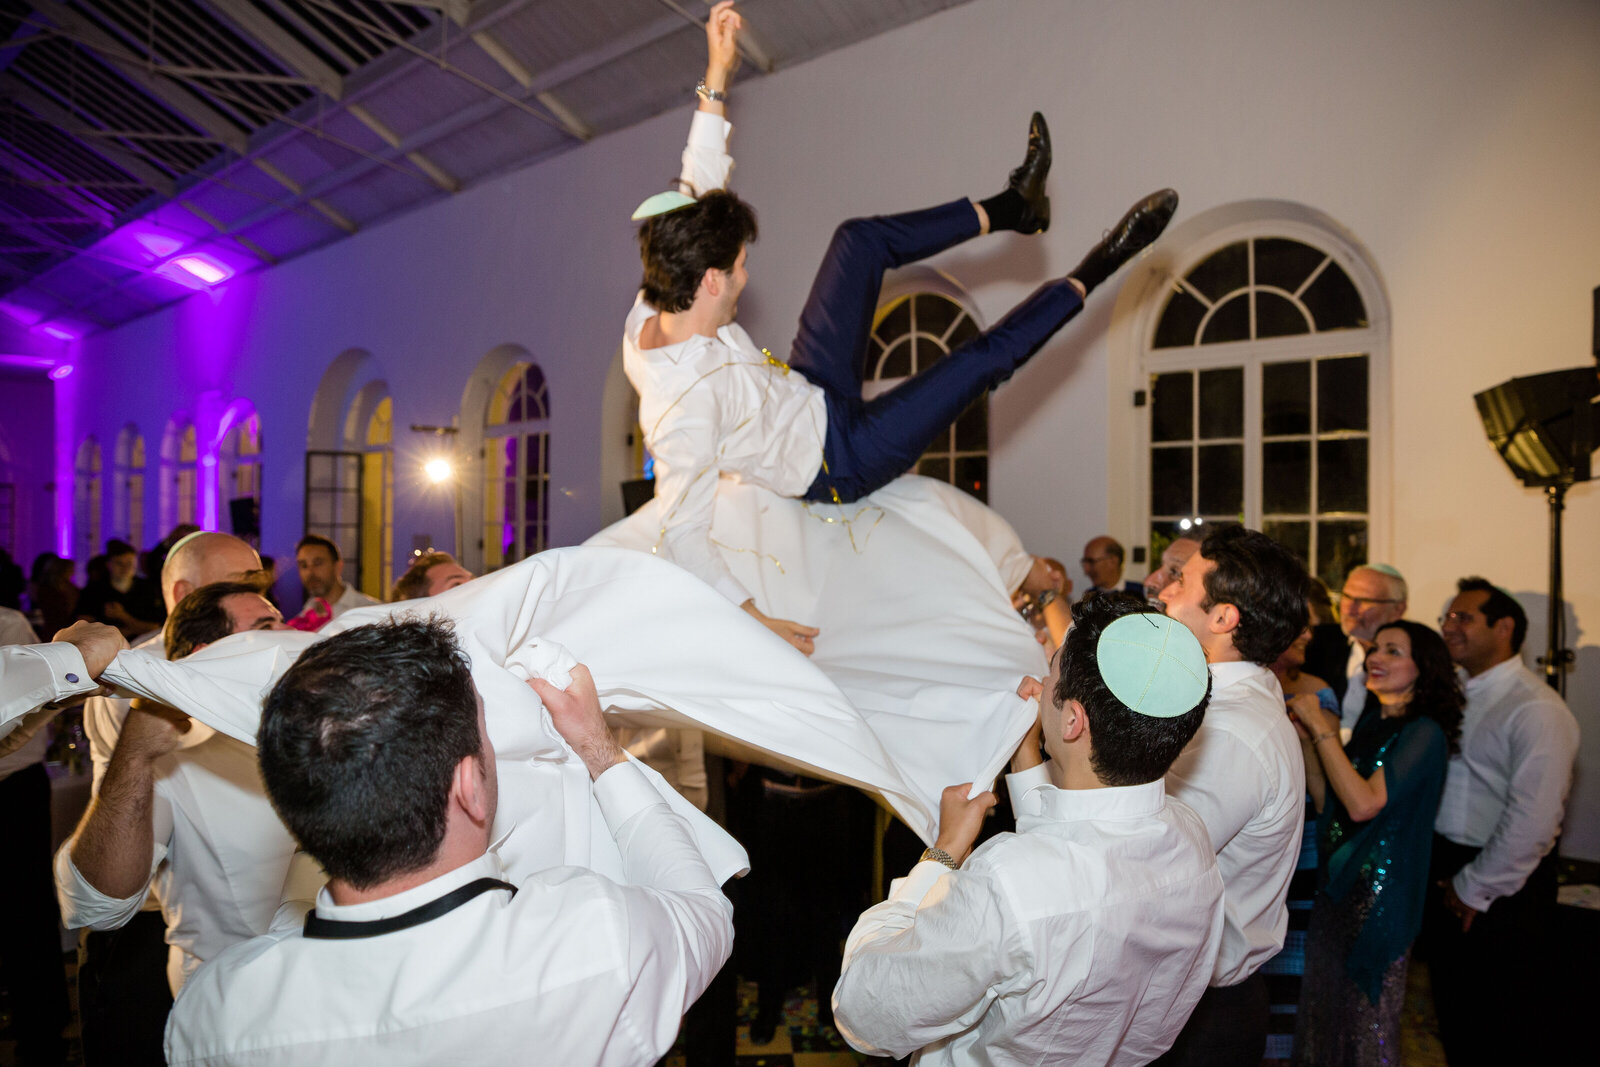 The Groom gets thrown in the air by guests